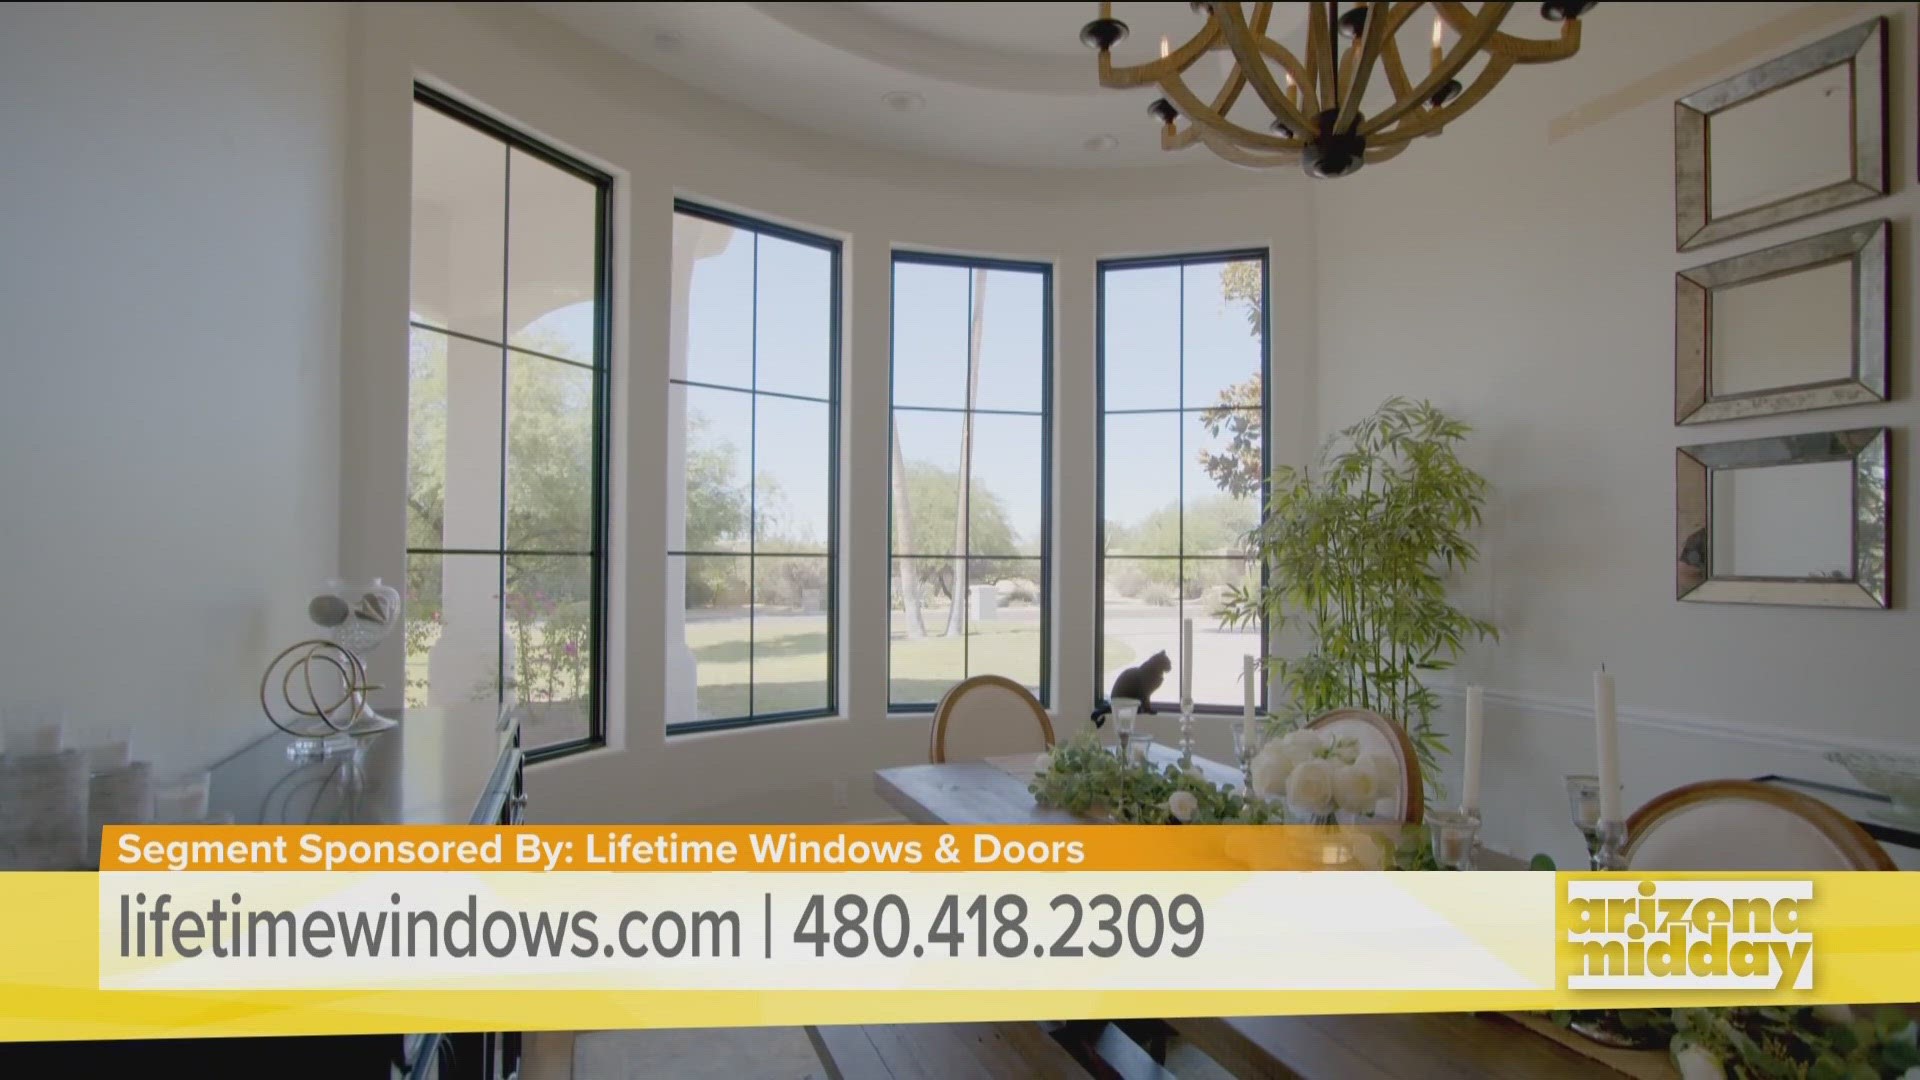 Billy Smith with Lifetime Windows & Doors talks about how their windows help with durability, energy efficiency and why weather stripping is important.